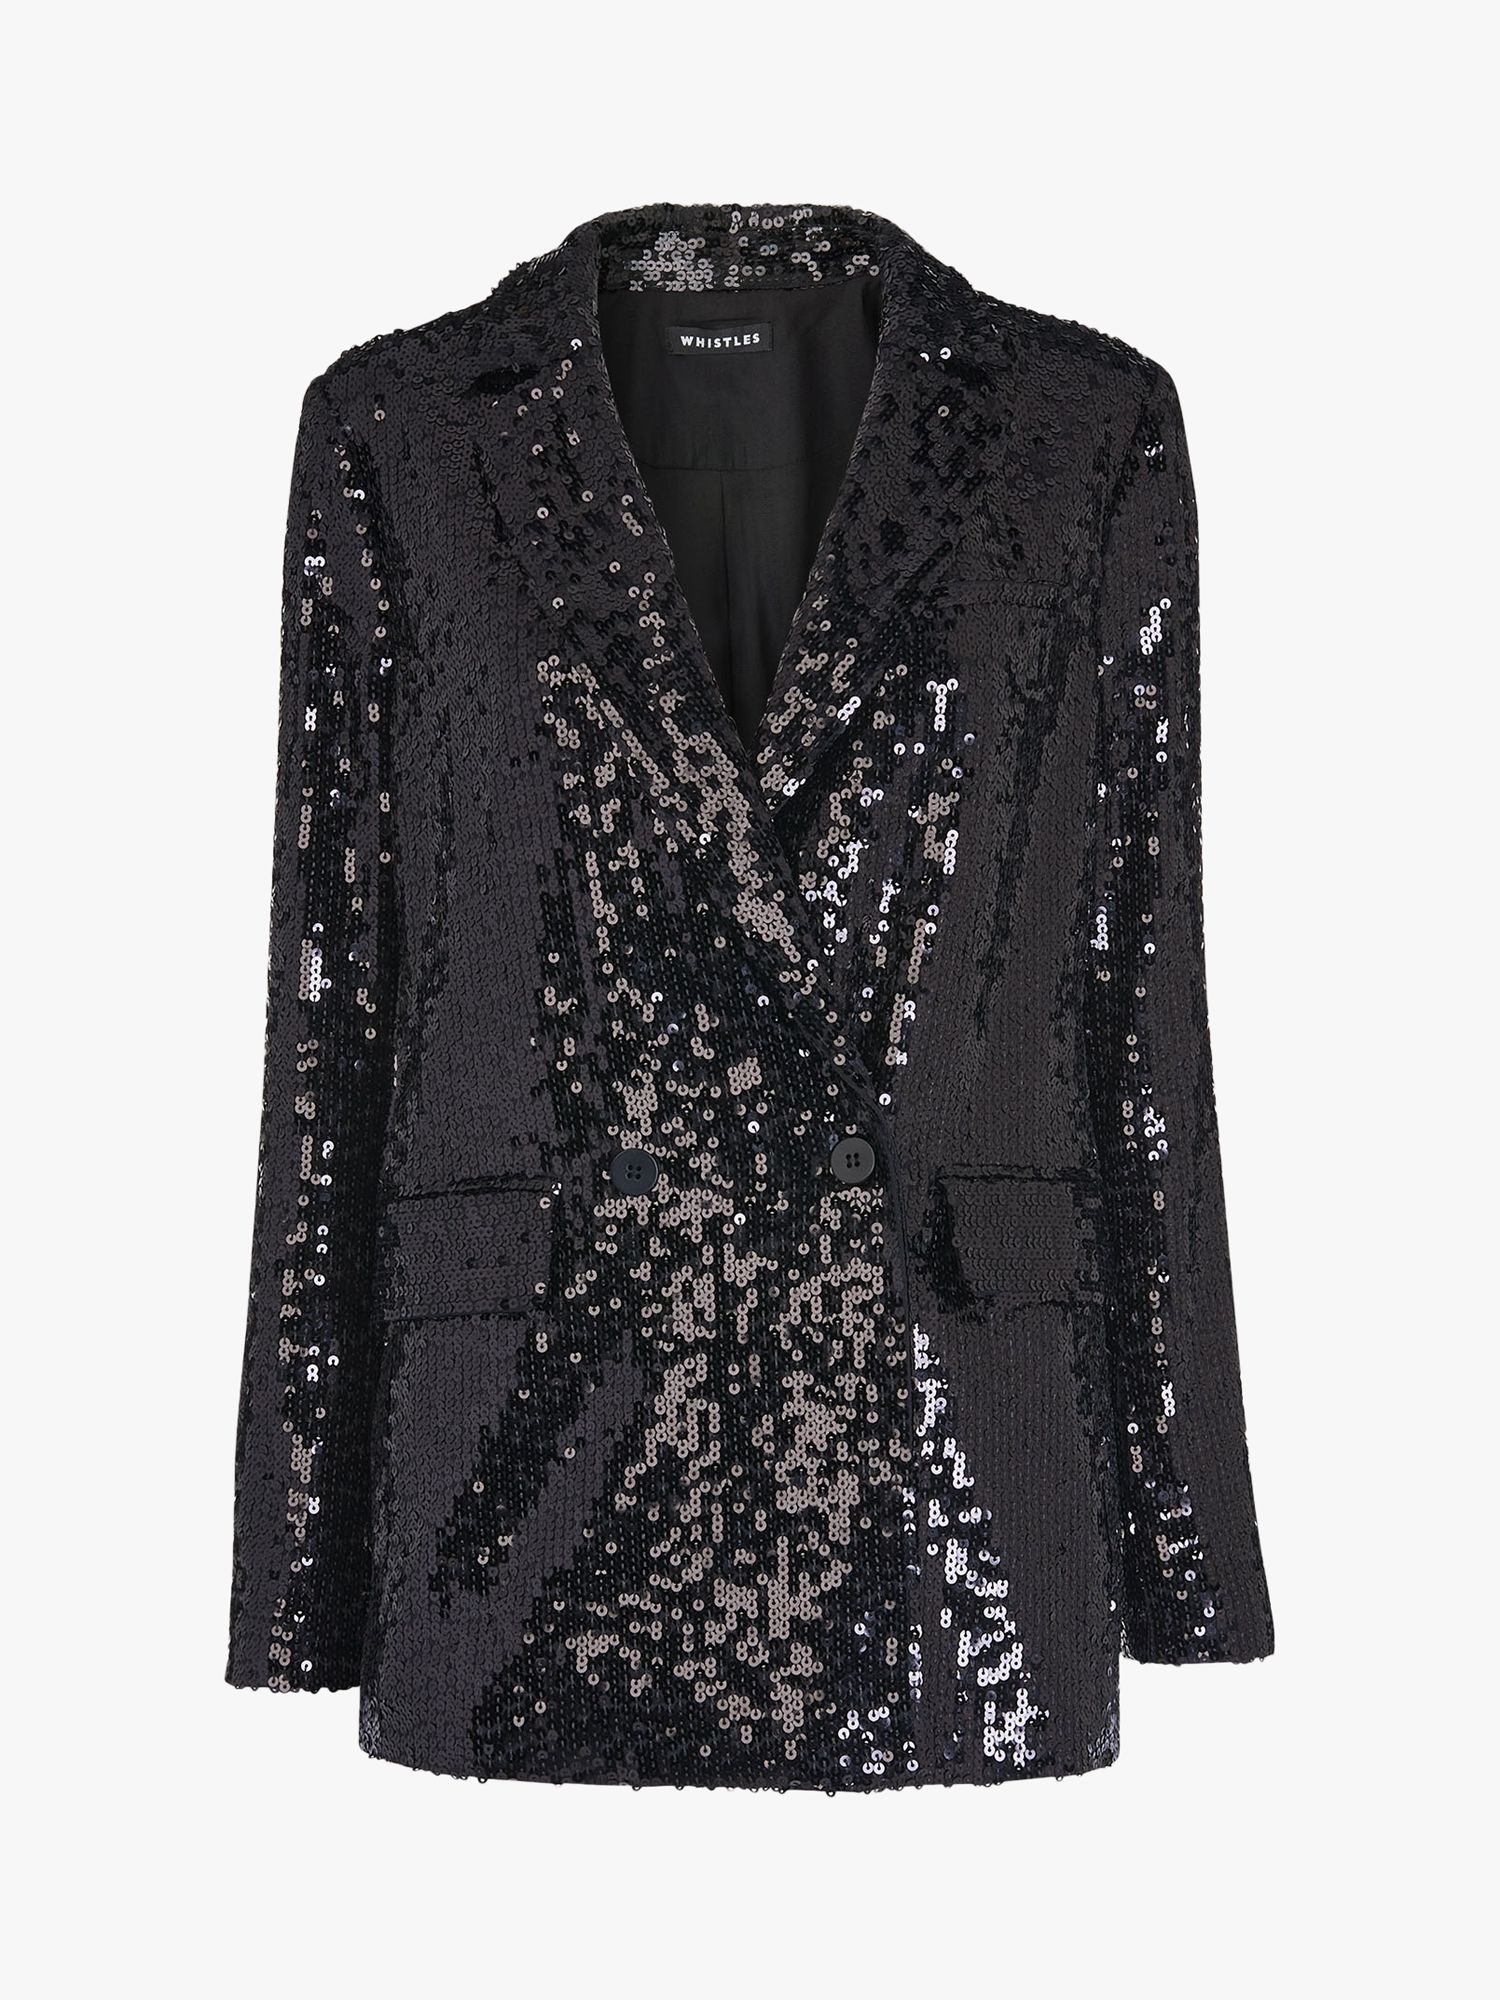 Whistles Sequin Double Breasted Jacket, Black at John Lewis & Partners